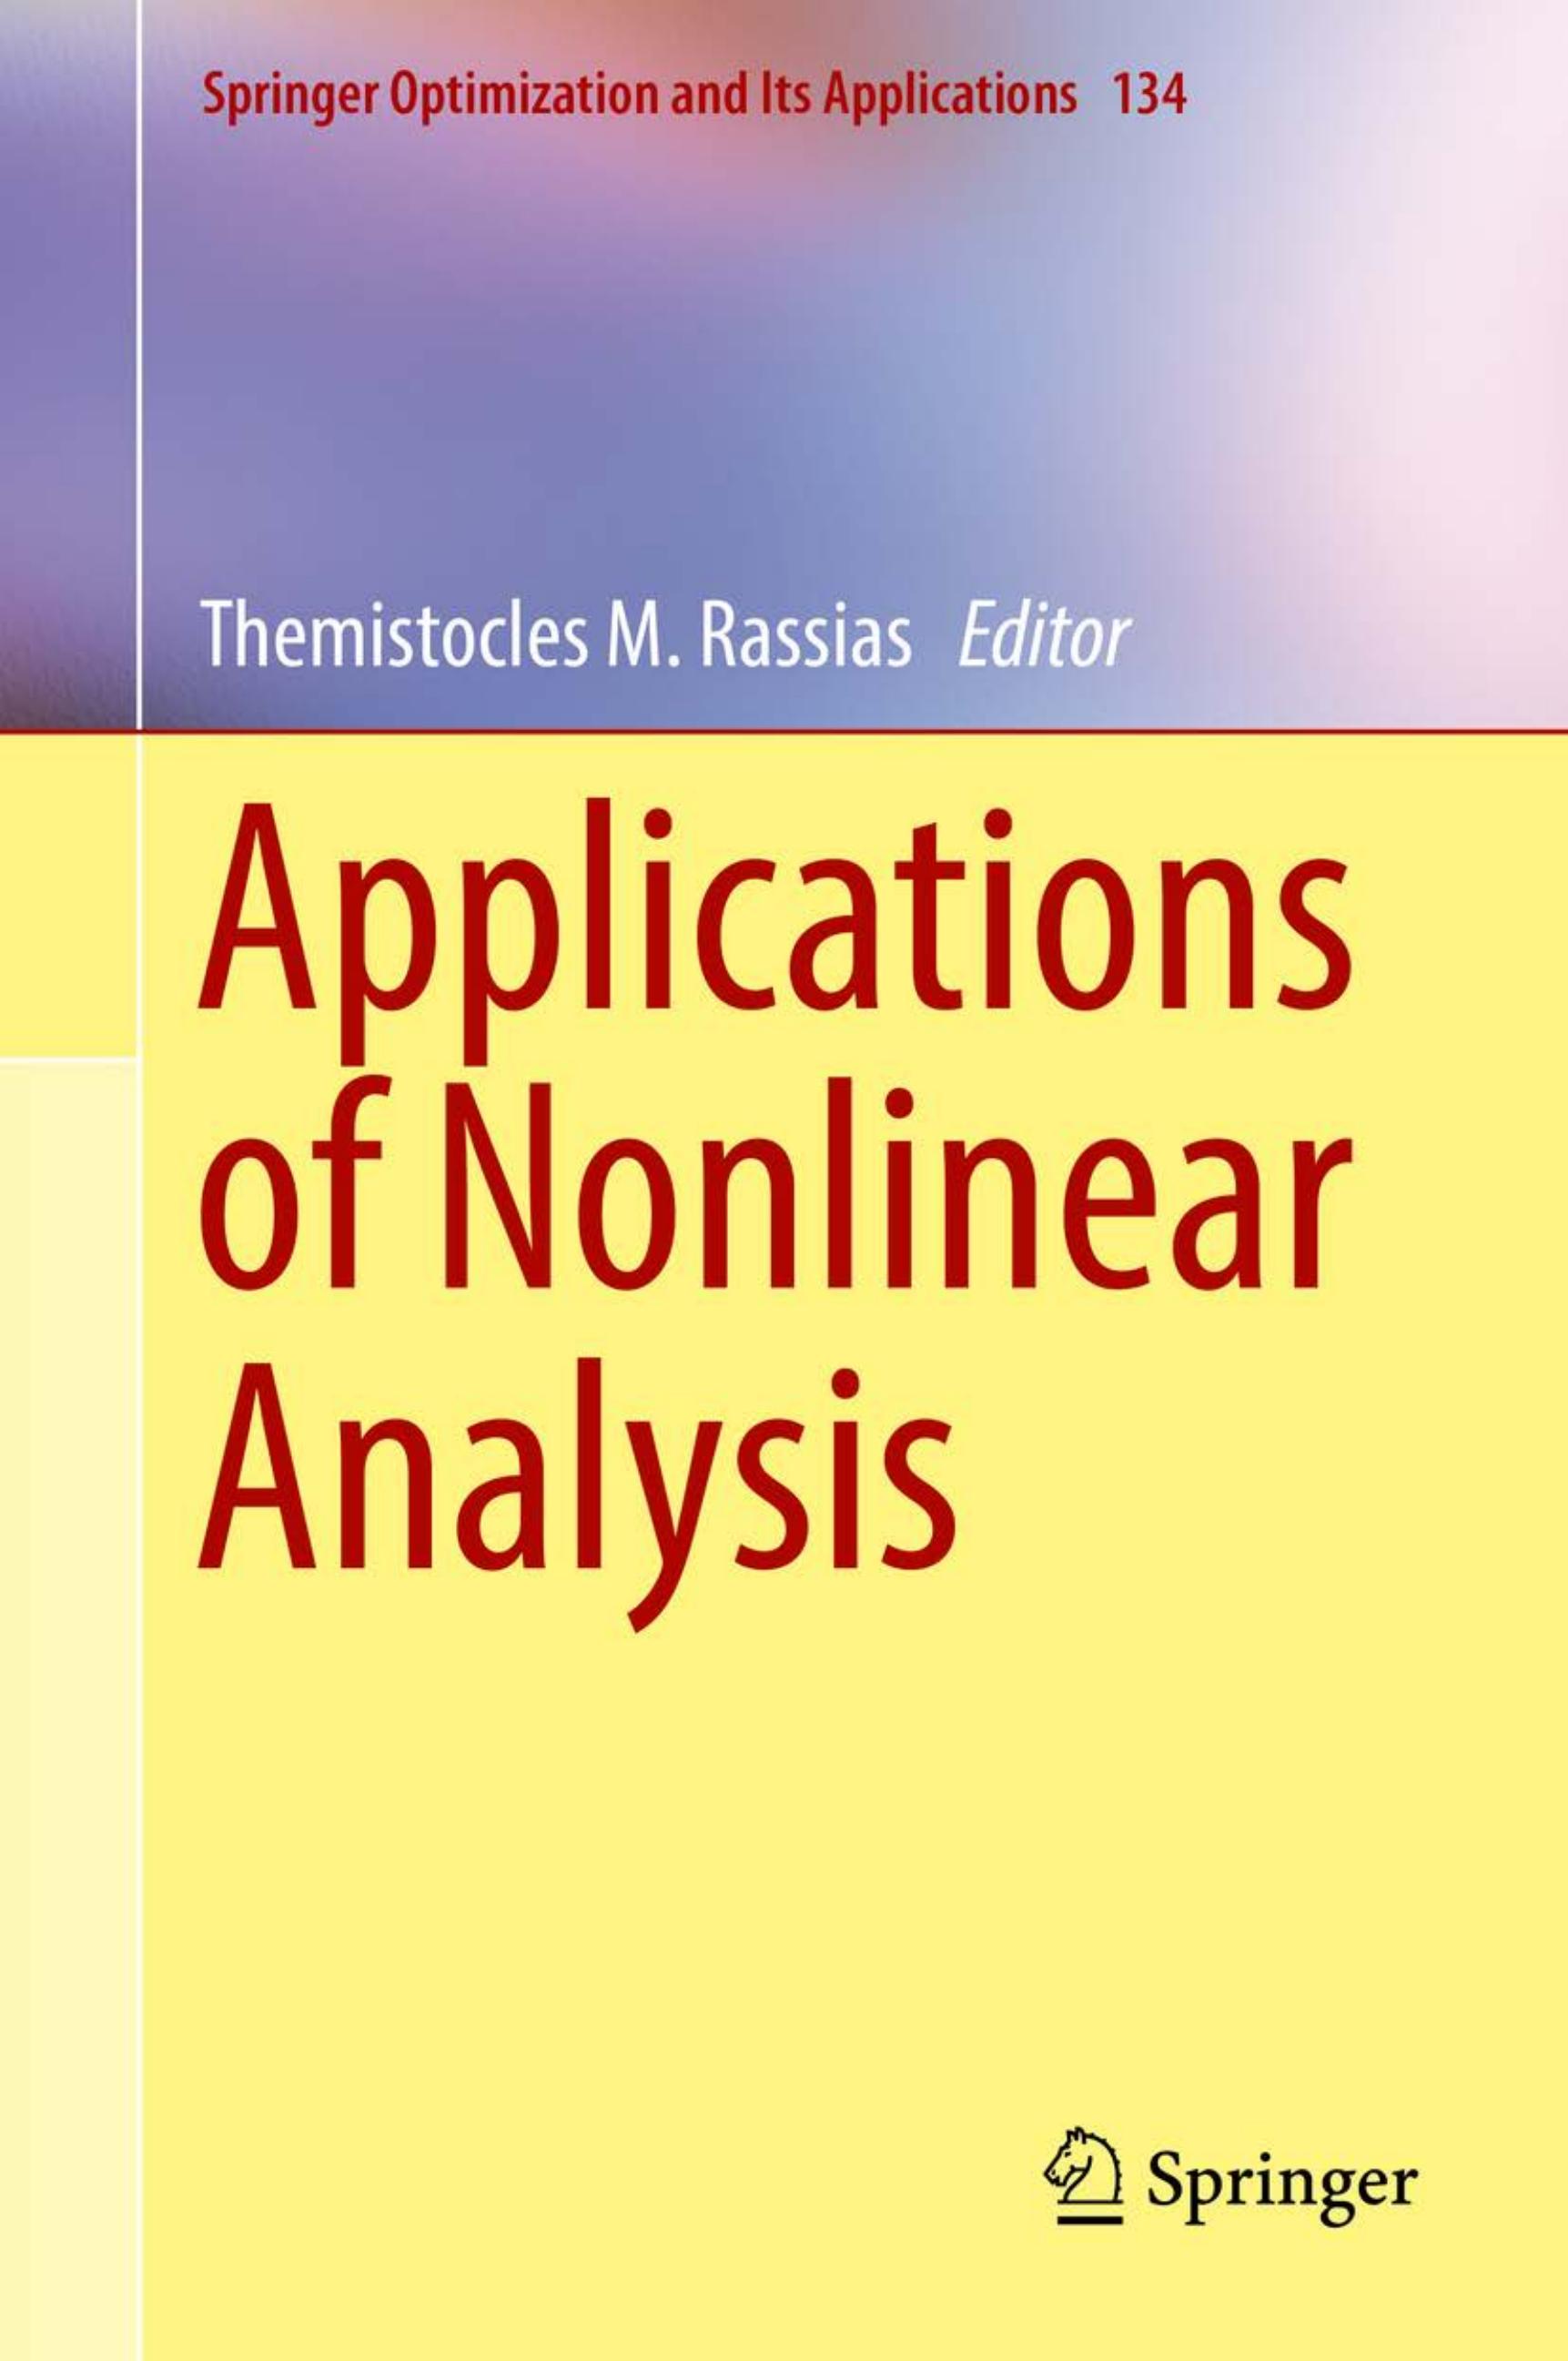 Applications of Nonlinear Analysis by Themistocles M. Rassias